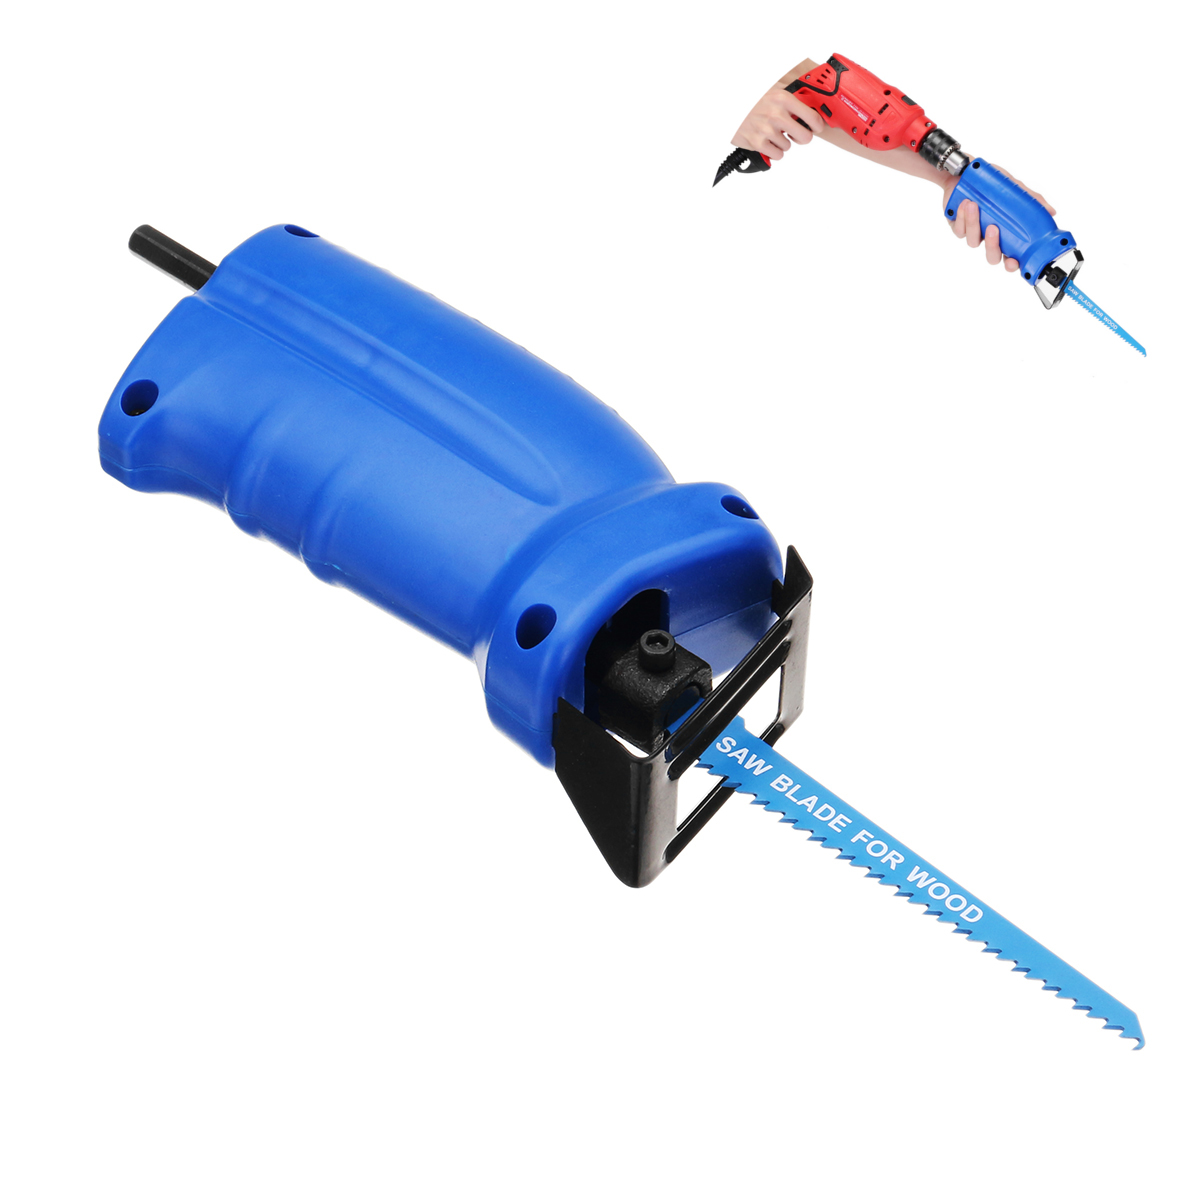 Drillpro-Portable-Reciprocating-Saw-Adapter-Set-Changed-Electric-Drill-Into-Reciprocating-Saw-1271597-1